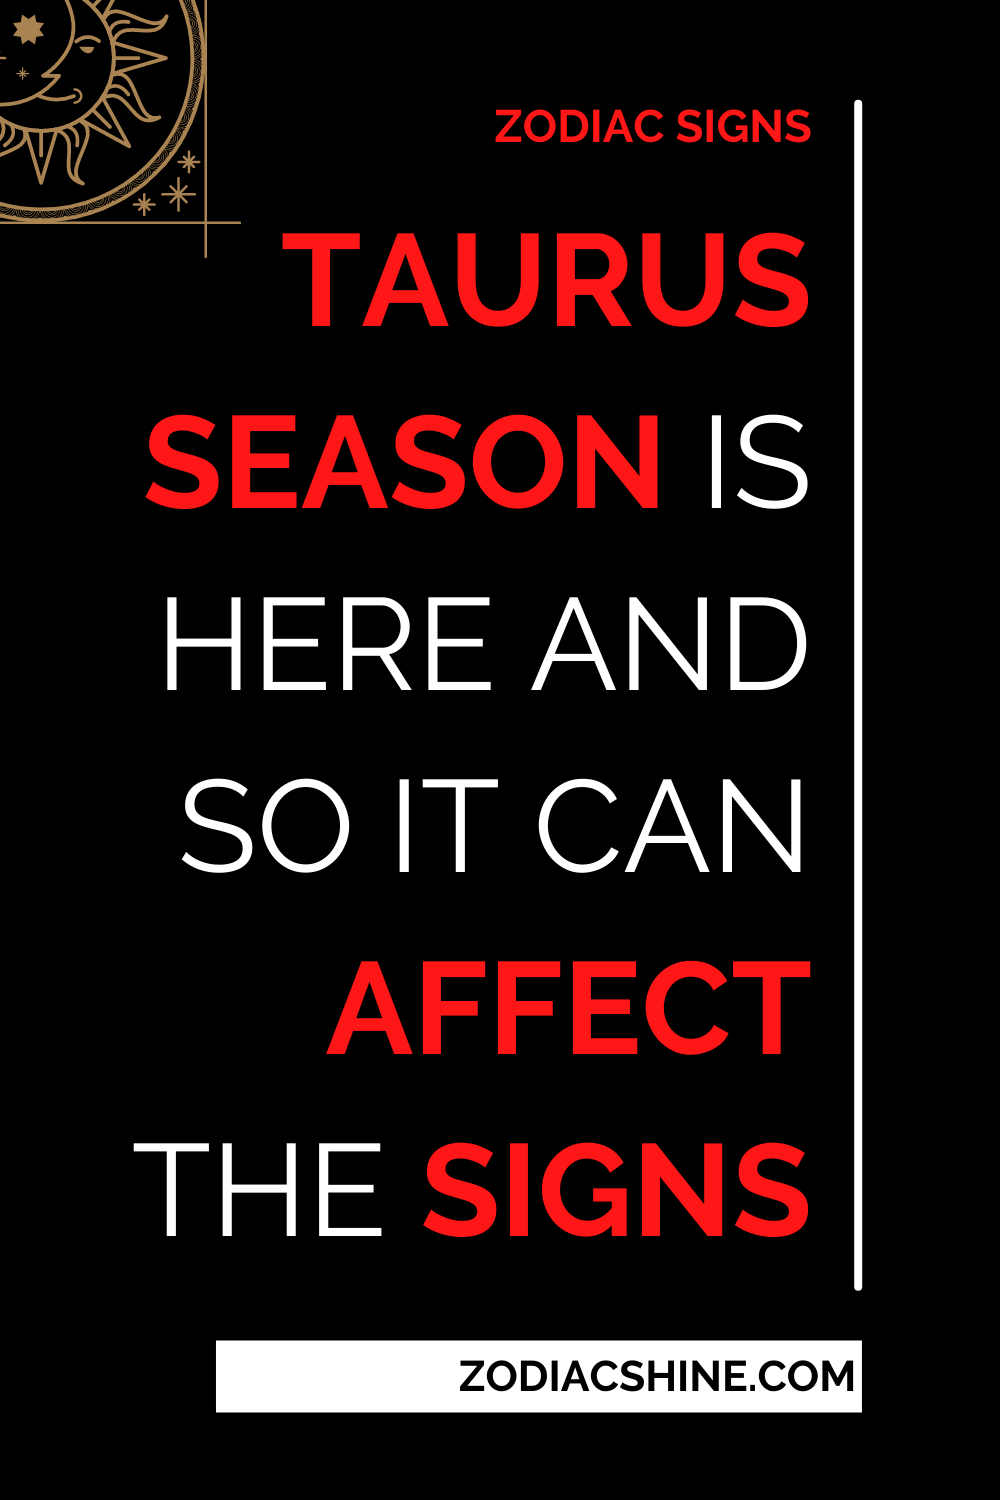 Taurus Season Is Here And So It Can Affect The Signs